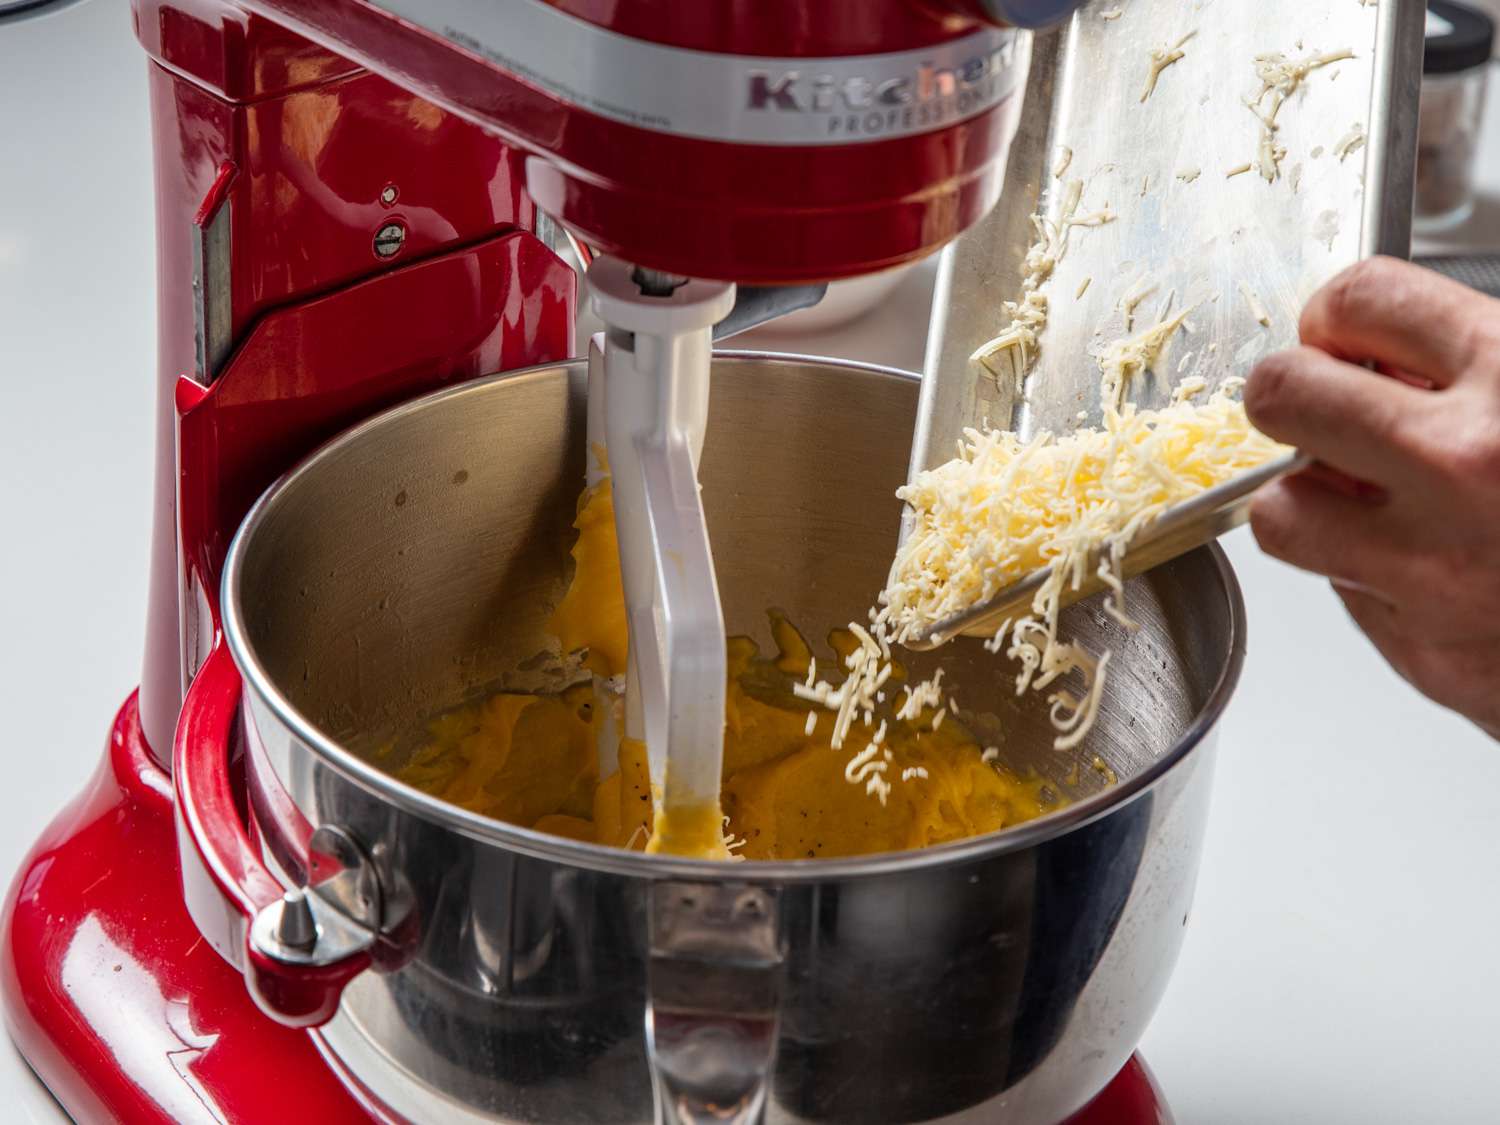 Shredded cheese is added to the stand mixer bowl.